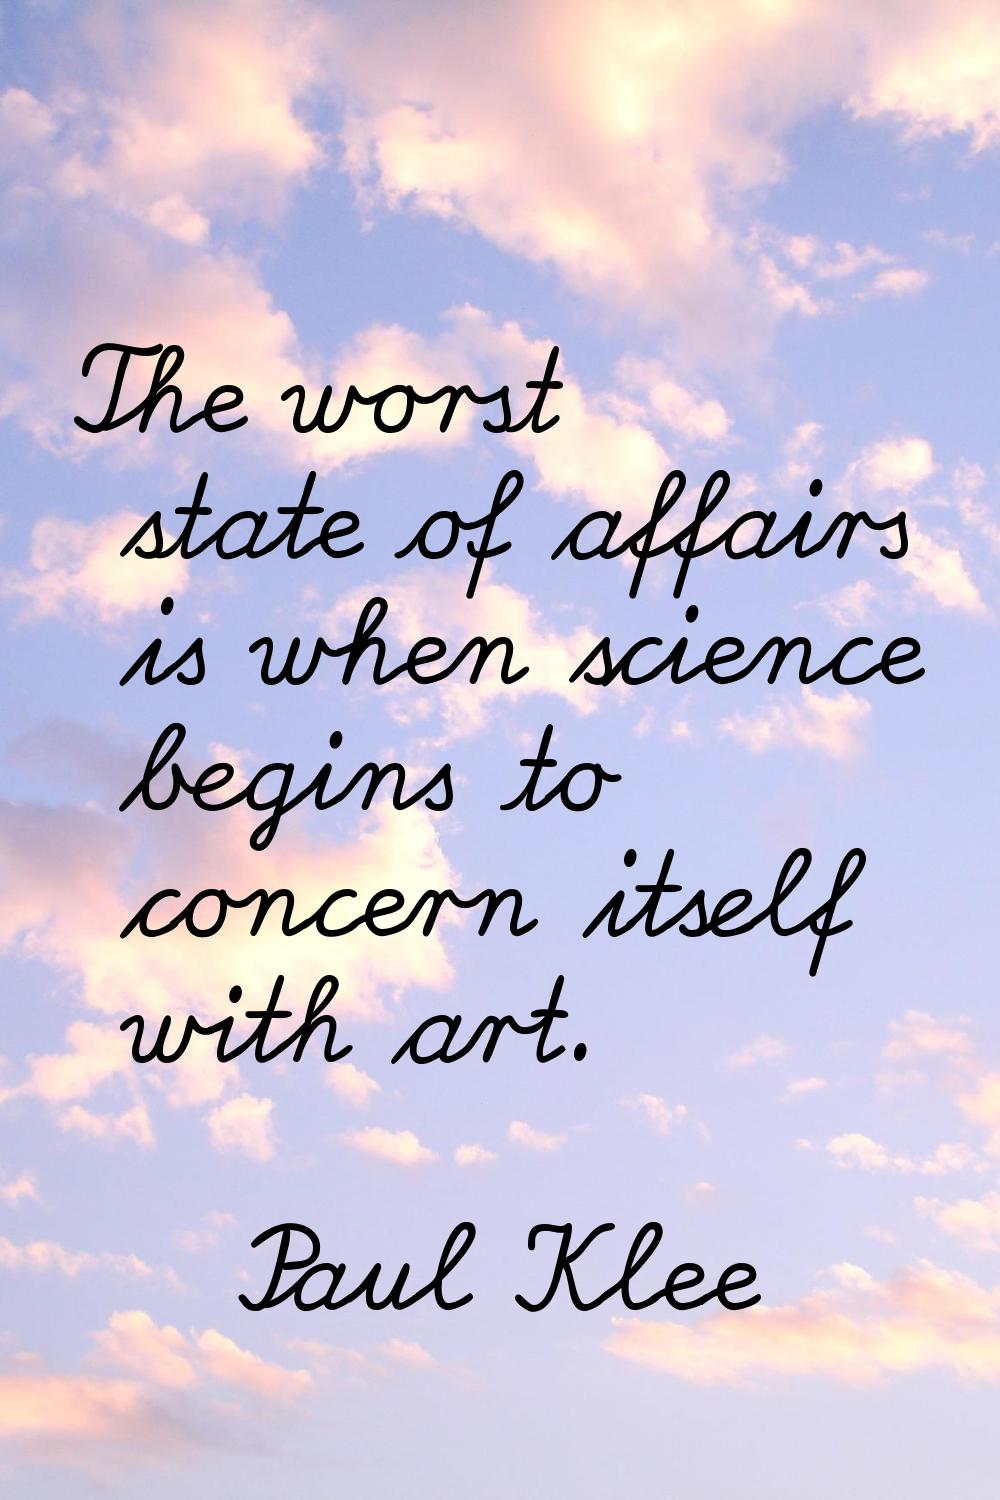 The worst state of affairs is when science begins to concern itself with art.